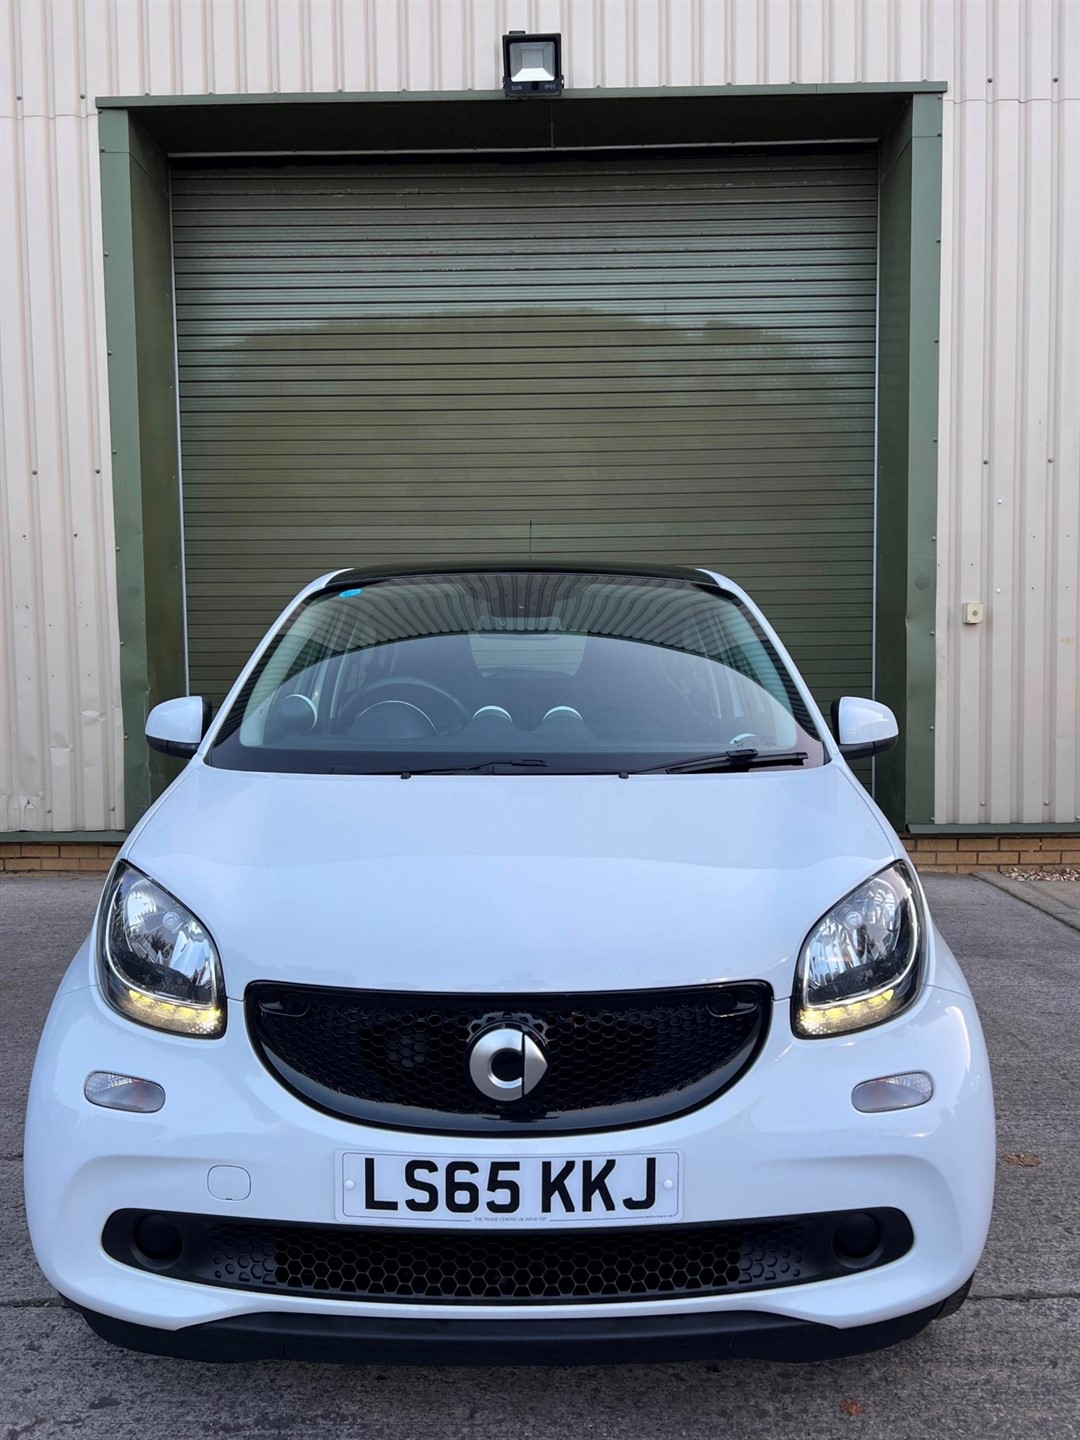 Used Smart Forfour for sale in Clitheroe, Lancashire